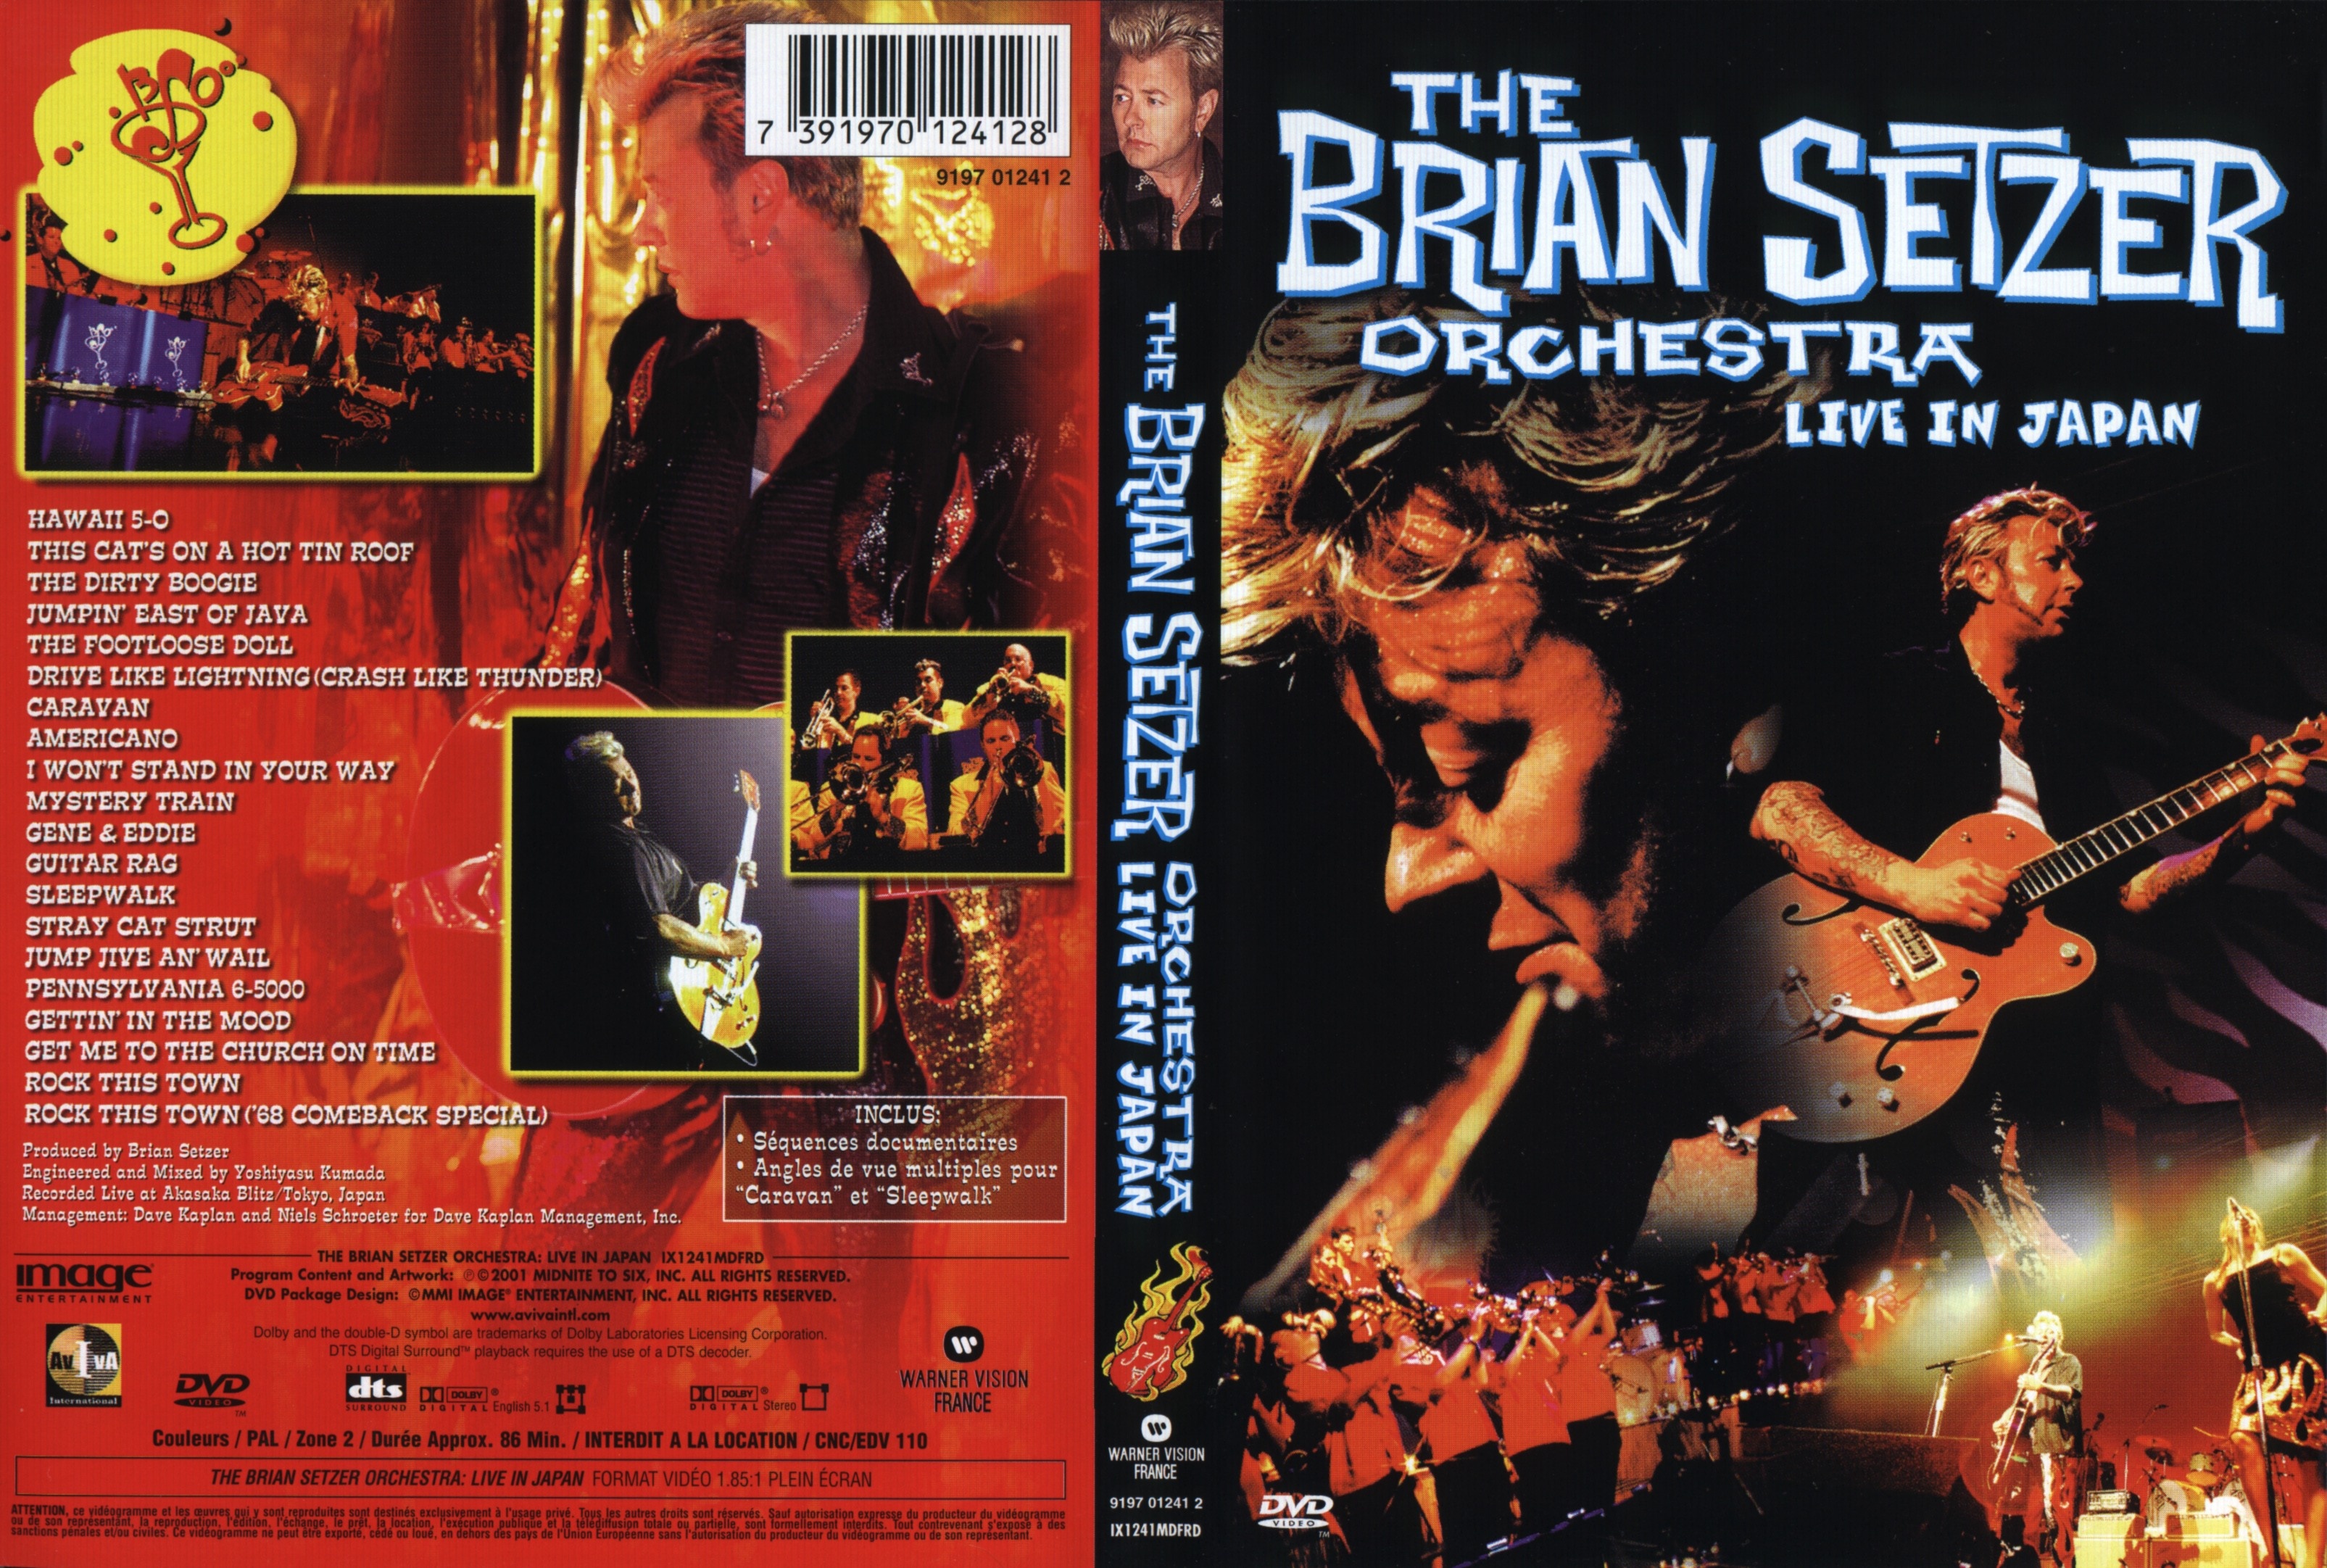 Jaquette DVD The Brian Setzer Orchestra live in japan